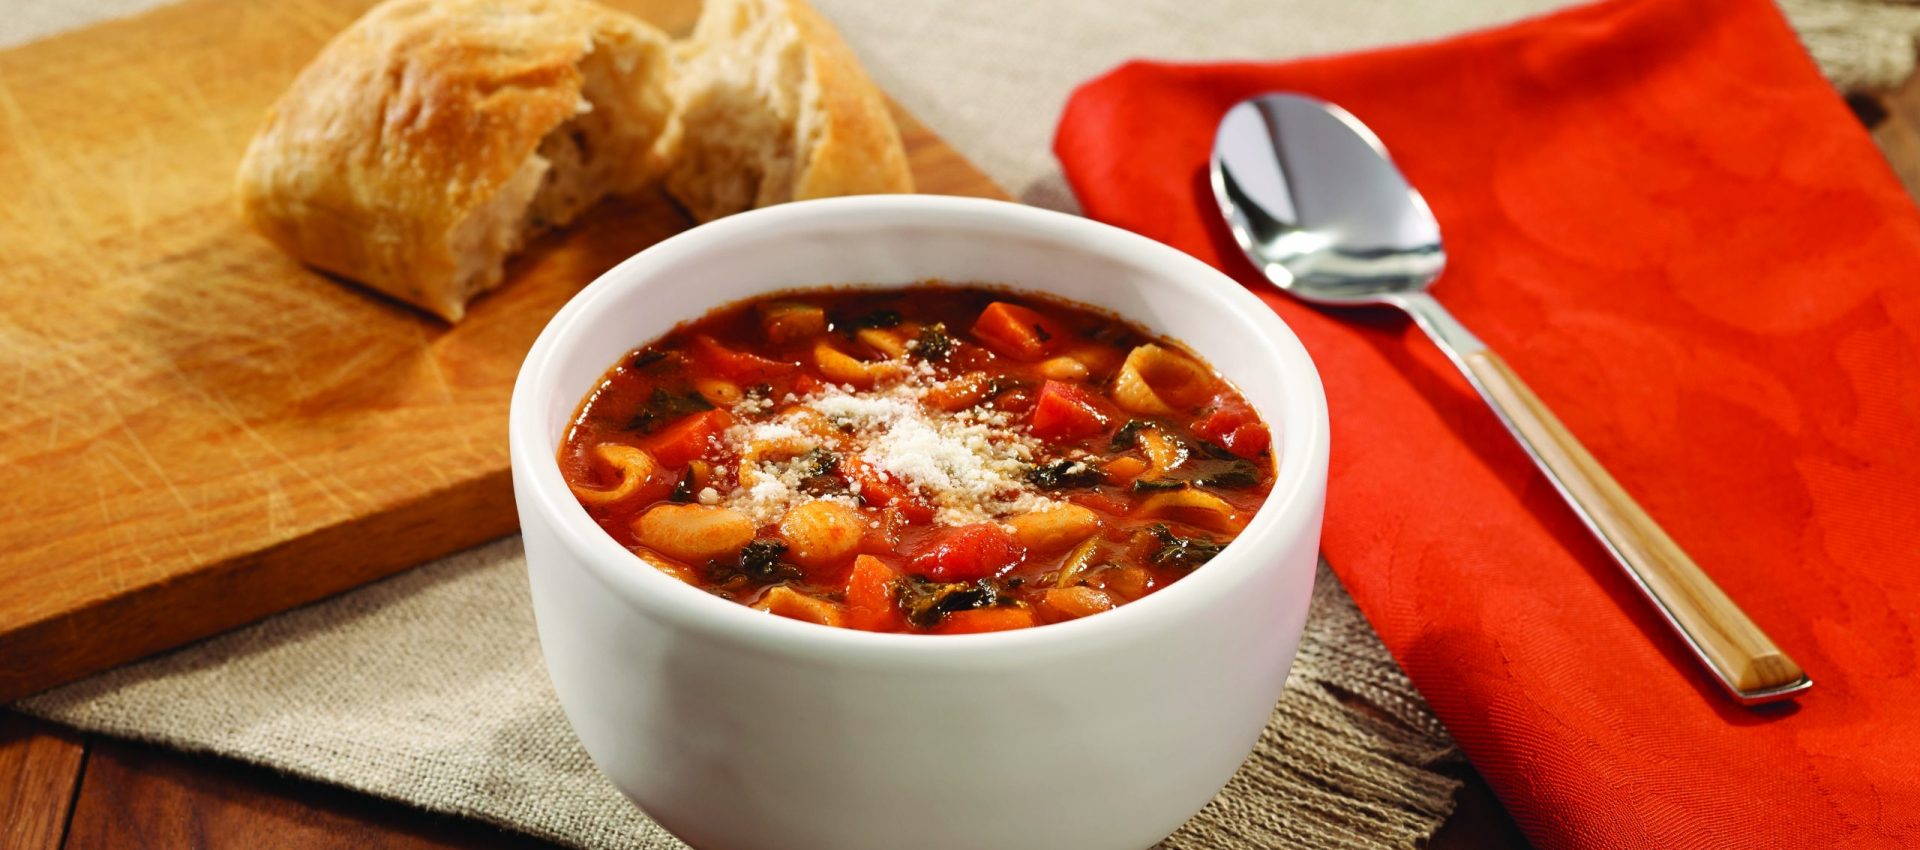 White-Bean-and-Kale-Minestrone-scaled-1920x850 Minestrone Soup with White Beans & Kale